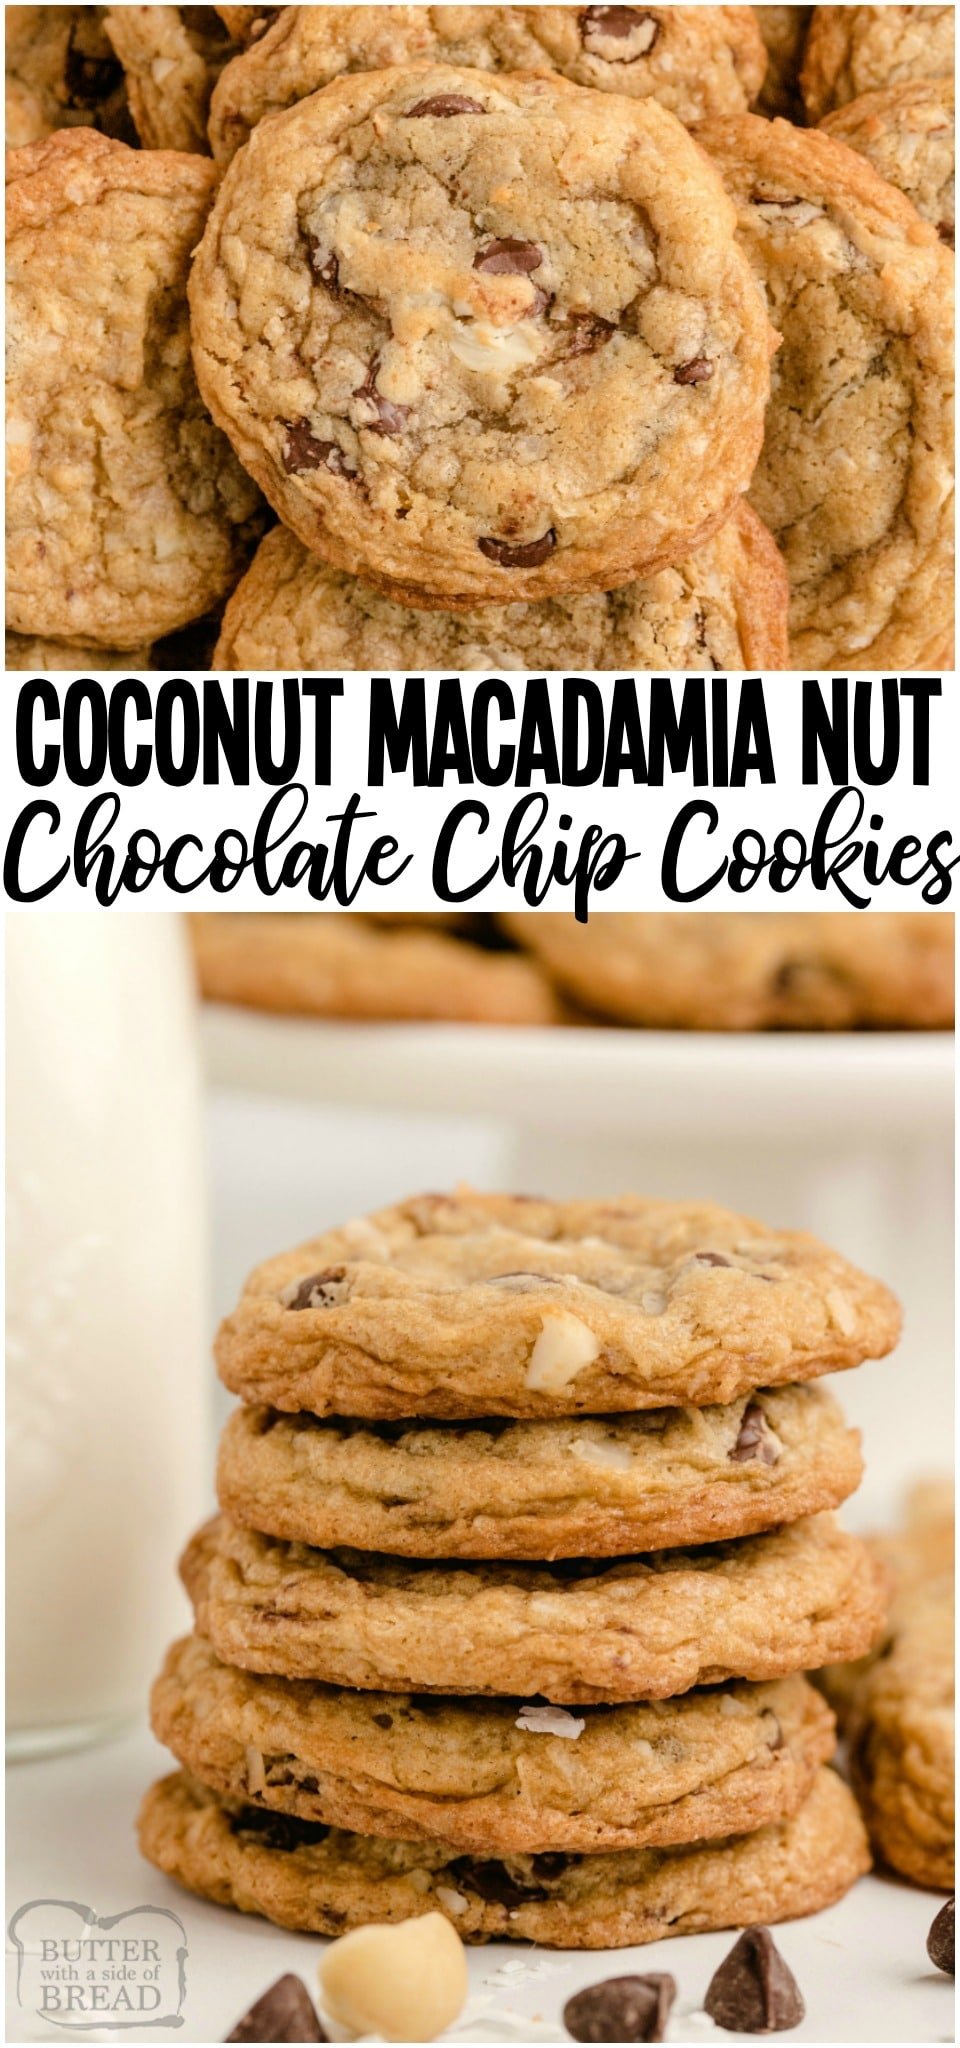 Coconut Macadamia Nut Cookies loaded with sweet coconut, chocolate chips & chopped macadamia nuts! Over the top chocolate chip cookie recipe with fantastic flavor, buttery crisp edges and a soft & chewy center. #cookies #coconut #macadamianut #chocolatechip #baking #dessert #MrsFields #recipe from BUTTER WITH A SIDE OF BREAD